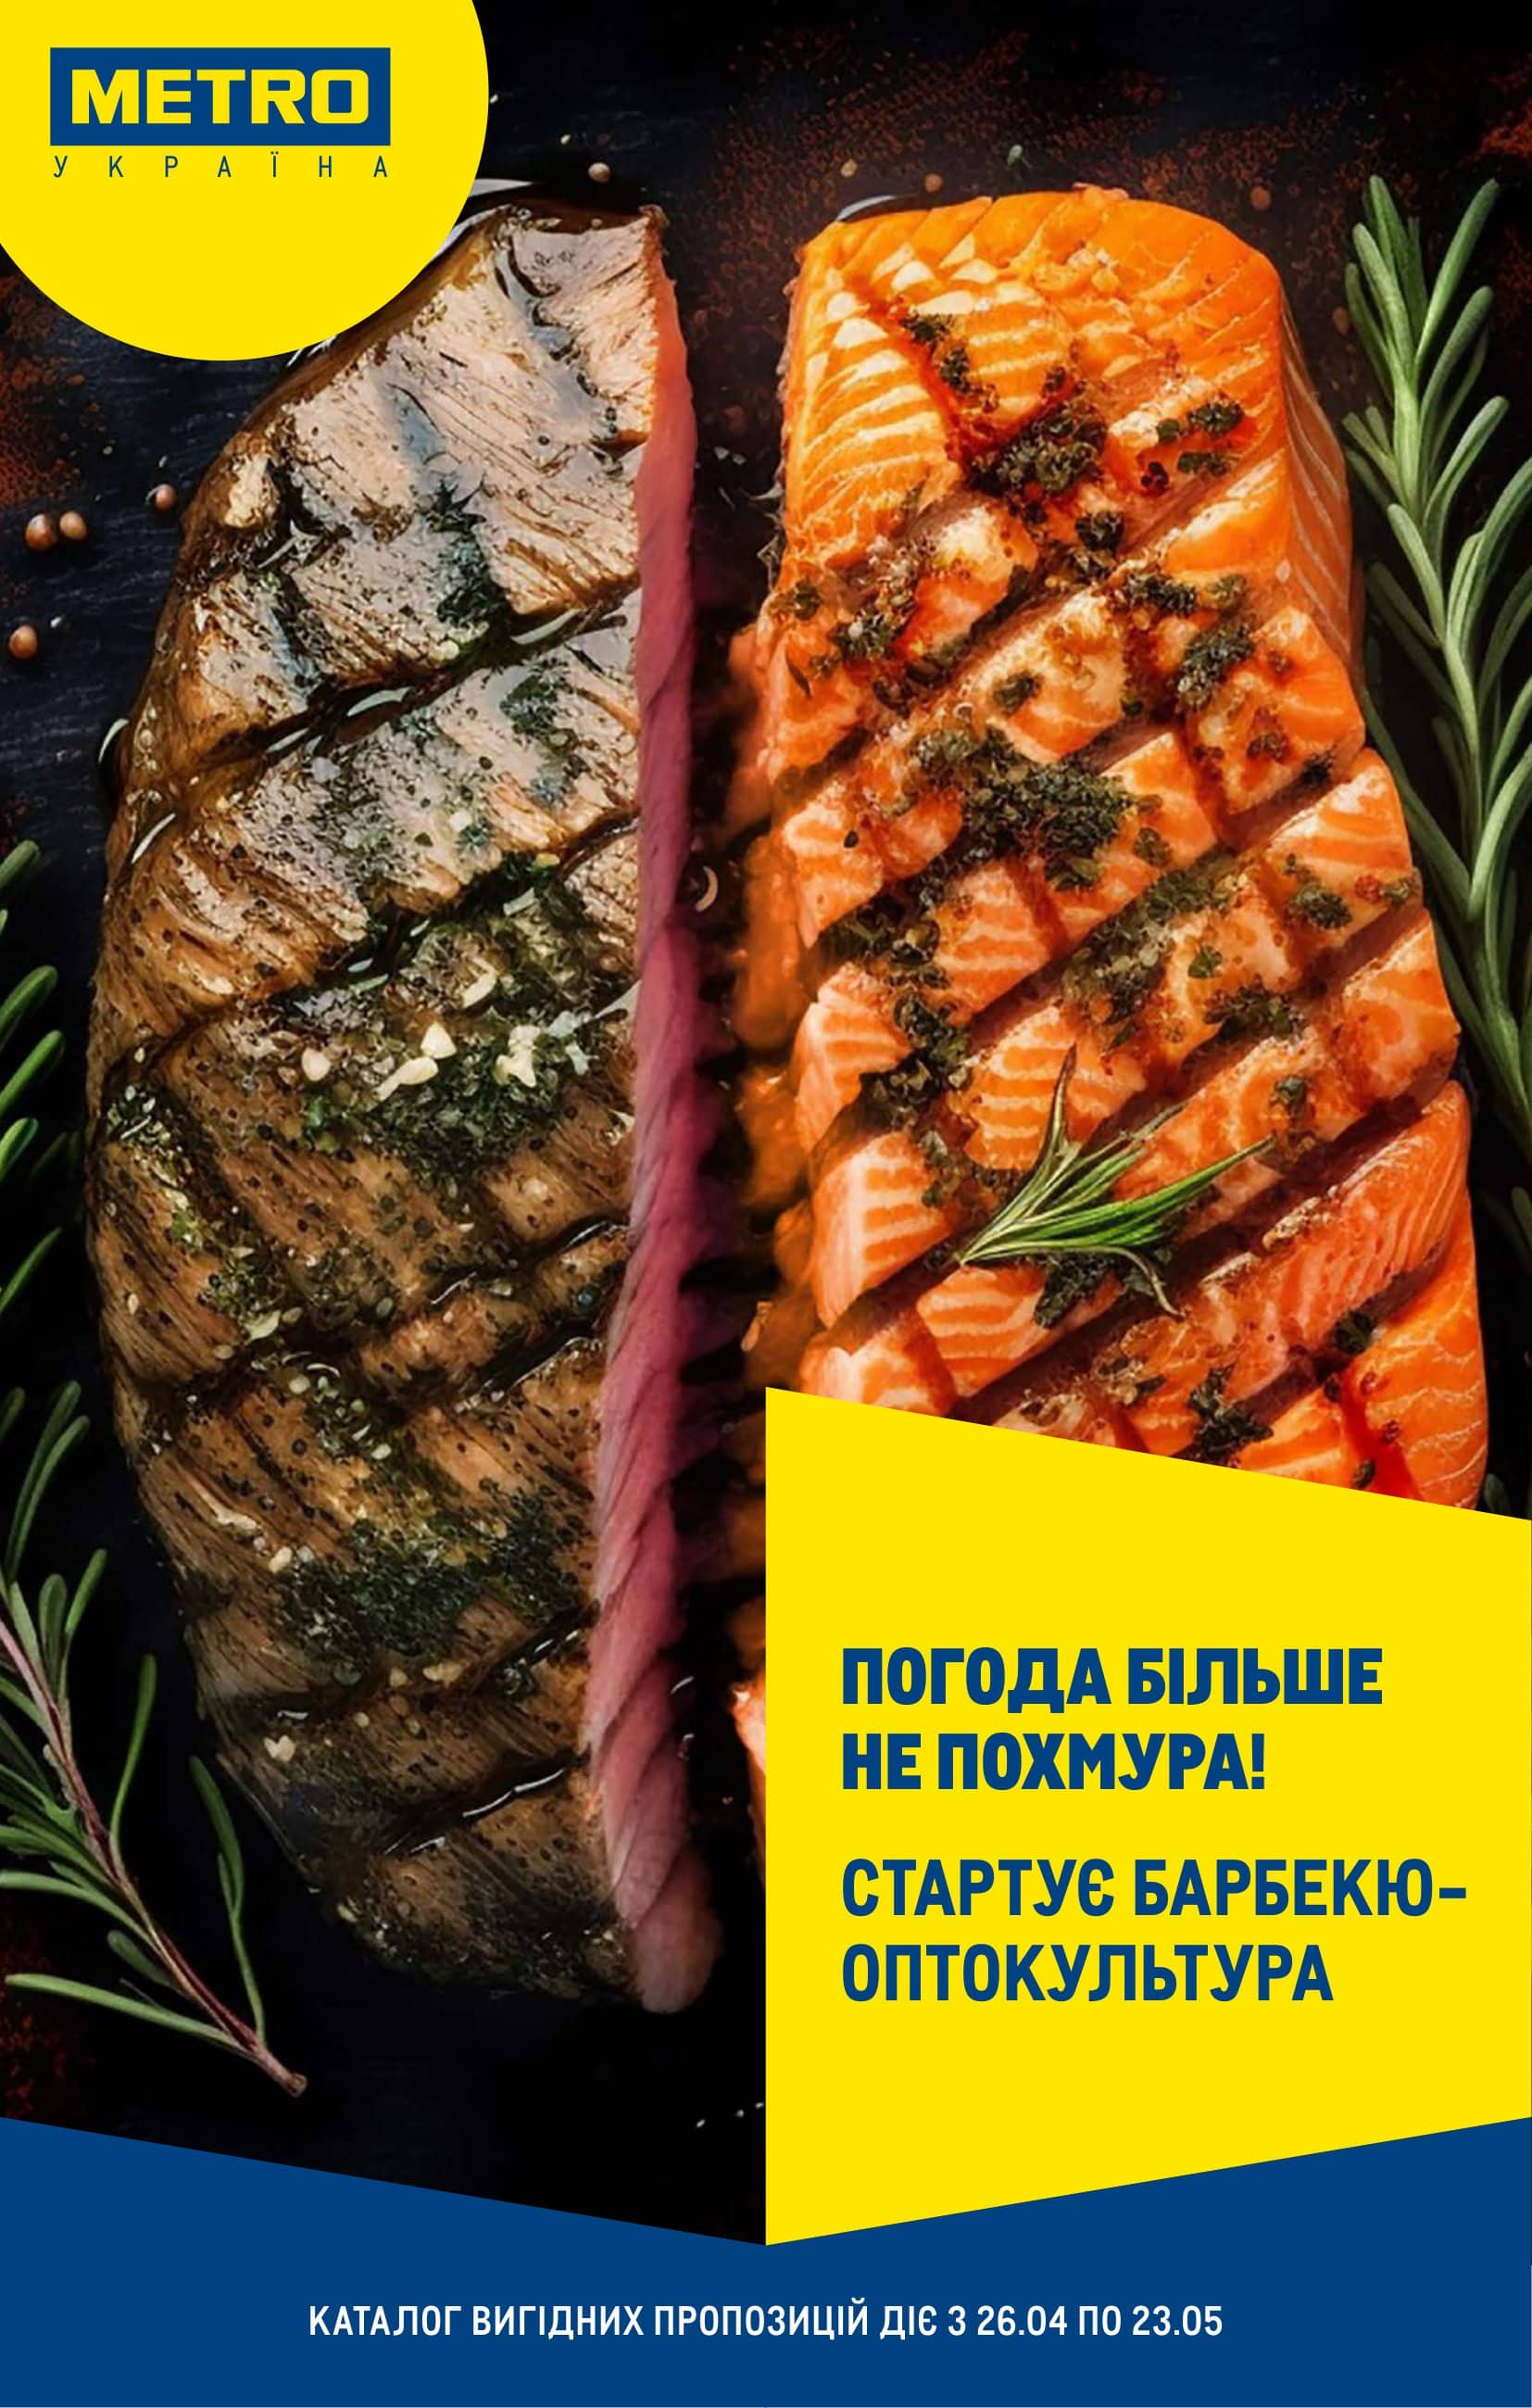 Metro - Catalog of optocultural barbecue - 1